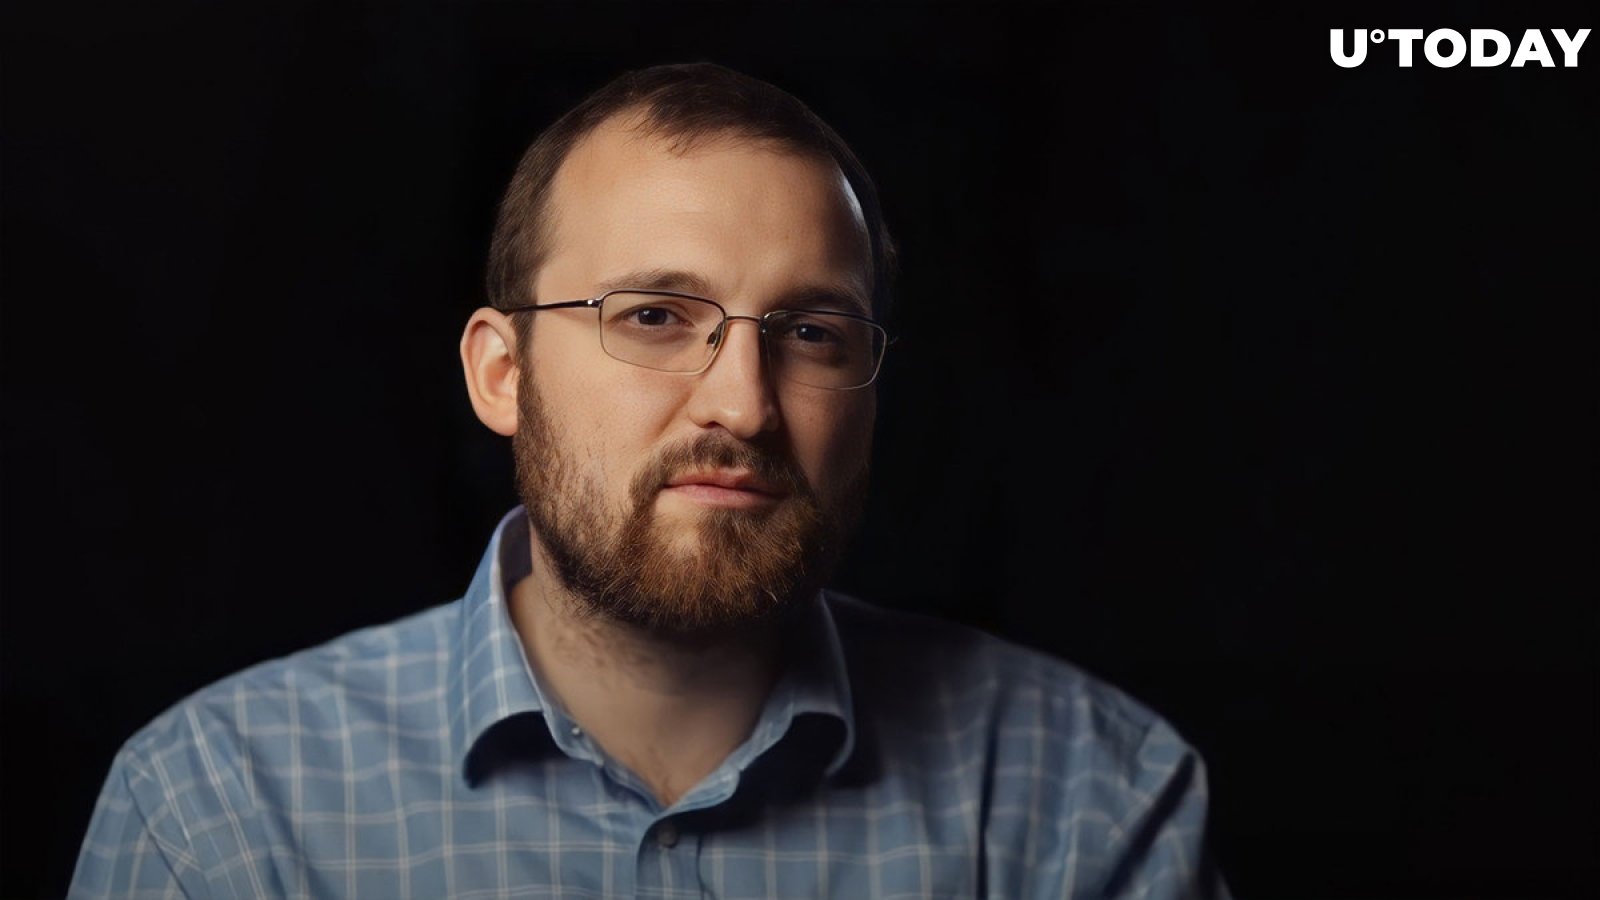 Cardano Creator Responds to Allegations He Spends Others' Money